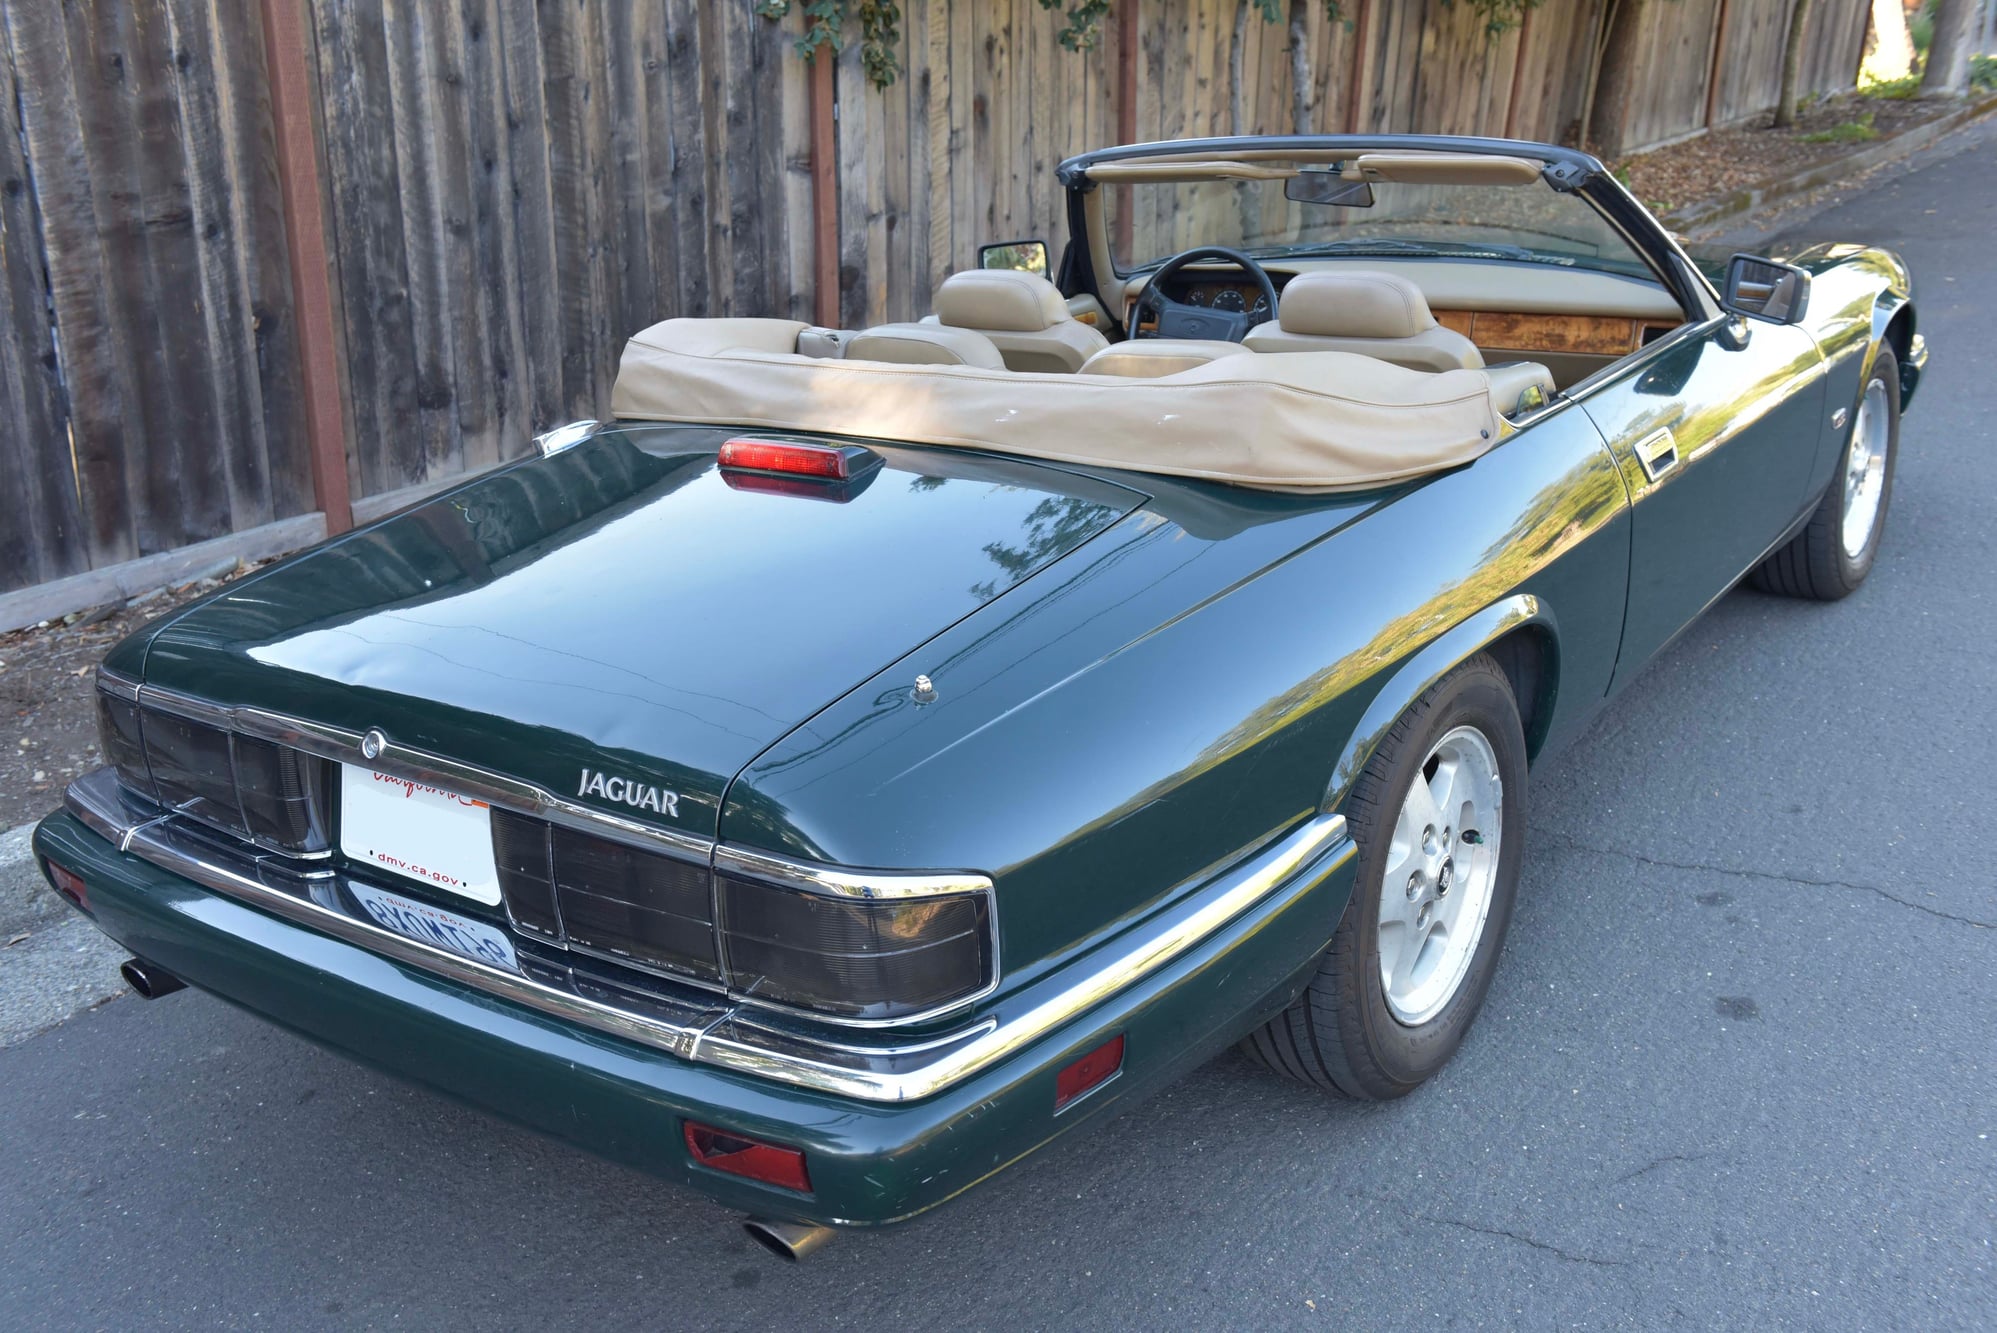 1995 Jaguar XJS - 1995 BRG XJS Convertible in CA - Used - VIN SAJNX2741SC197298 - 195,224 Miles - 6 cyl - 2WD - Automatic - Convertible - Other - Santa Rosa, CA 95404, United States